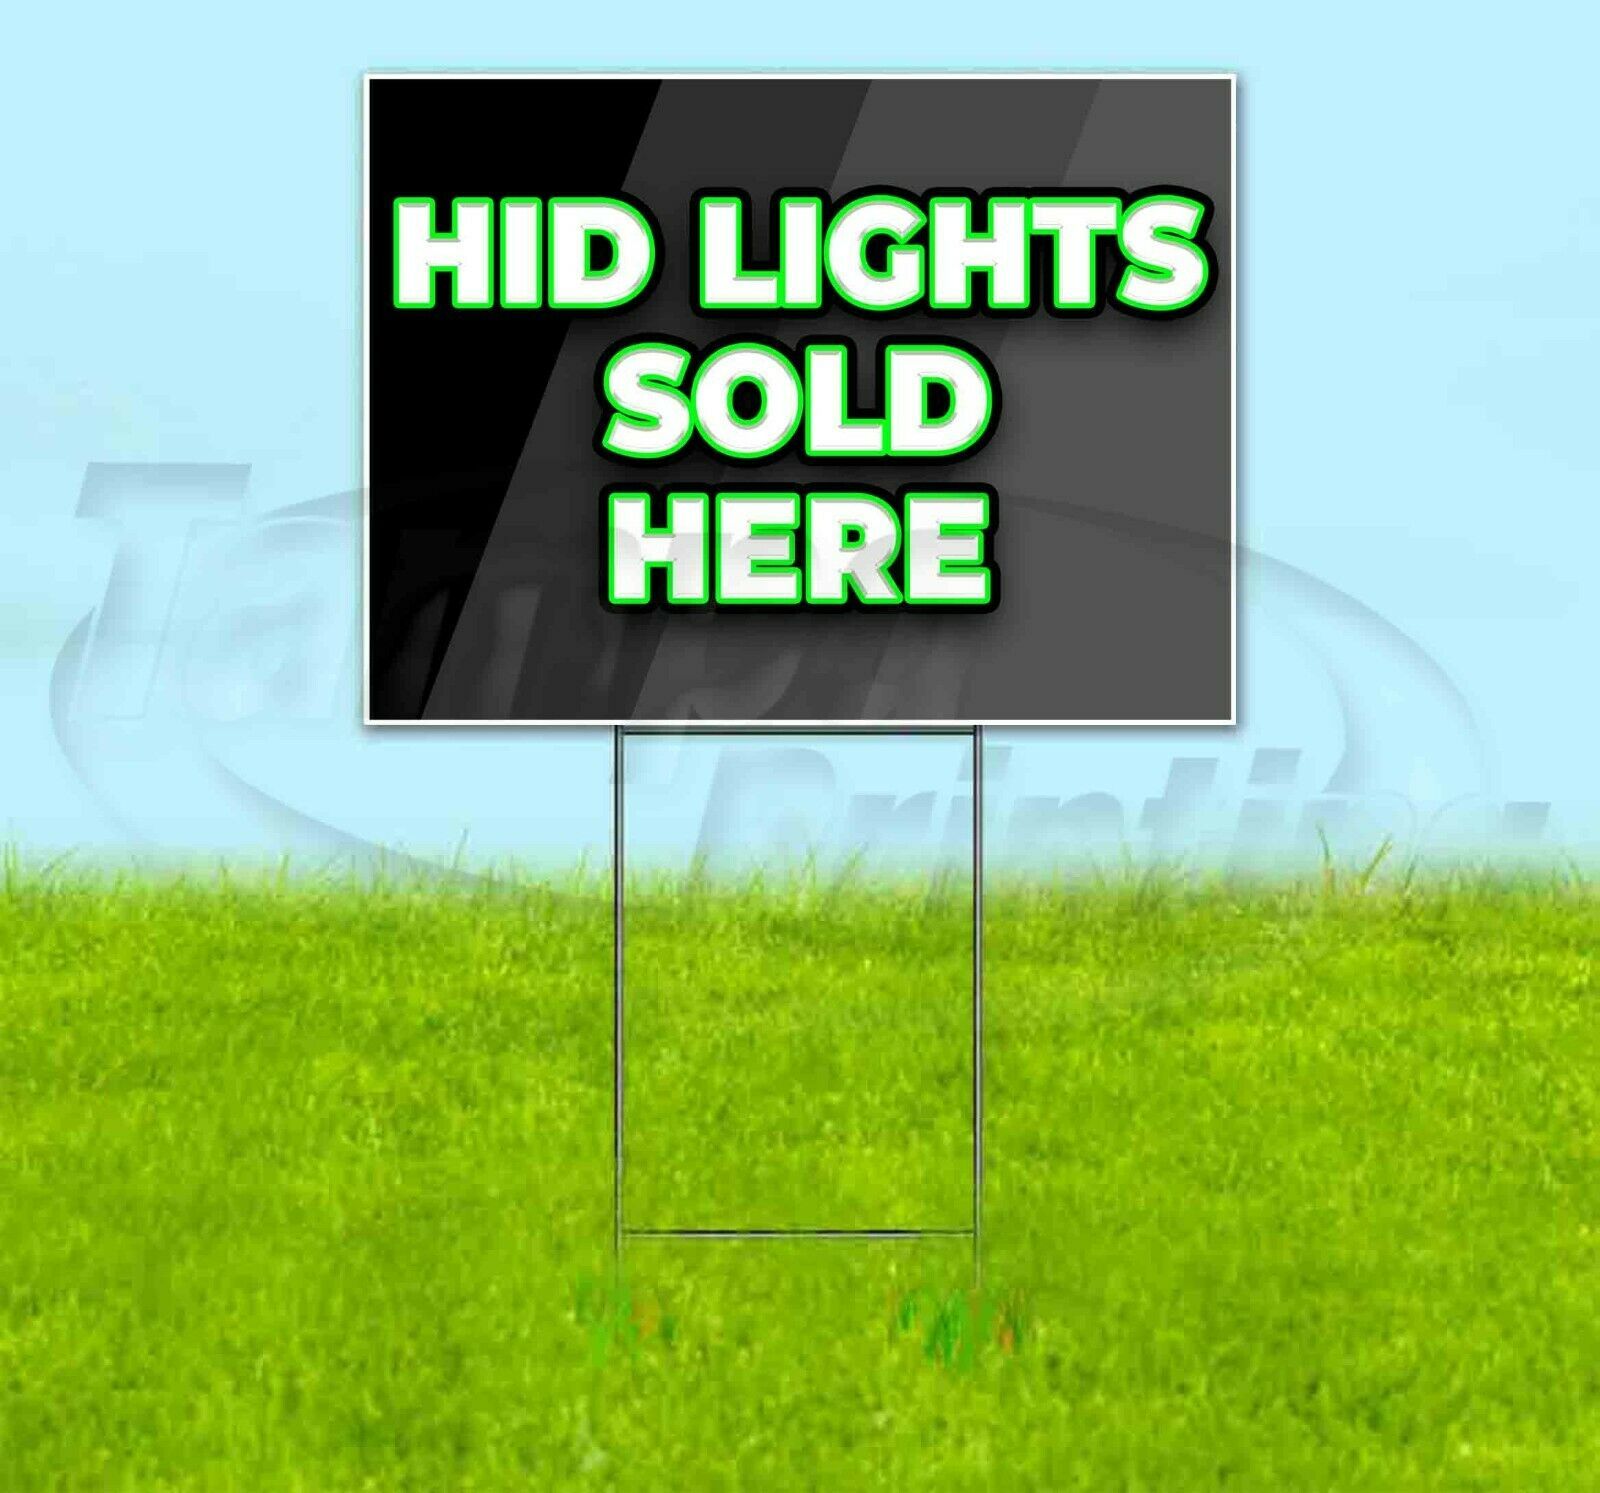 HID LIGHTS SOLD HERE 18x24 Yard Sign Corrugated Plastic Bandit Lawn USA